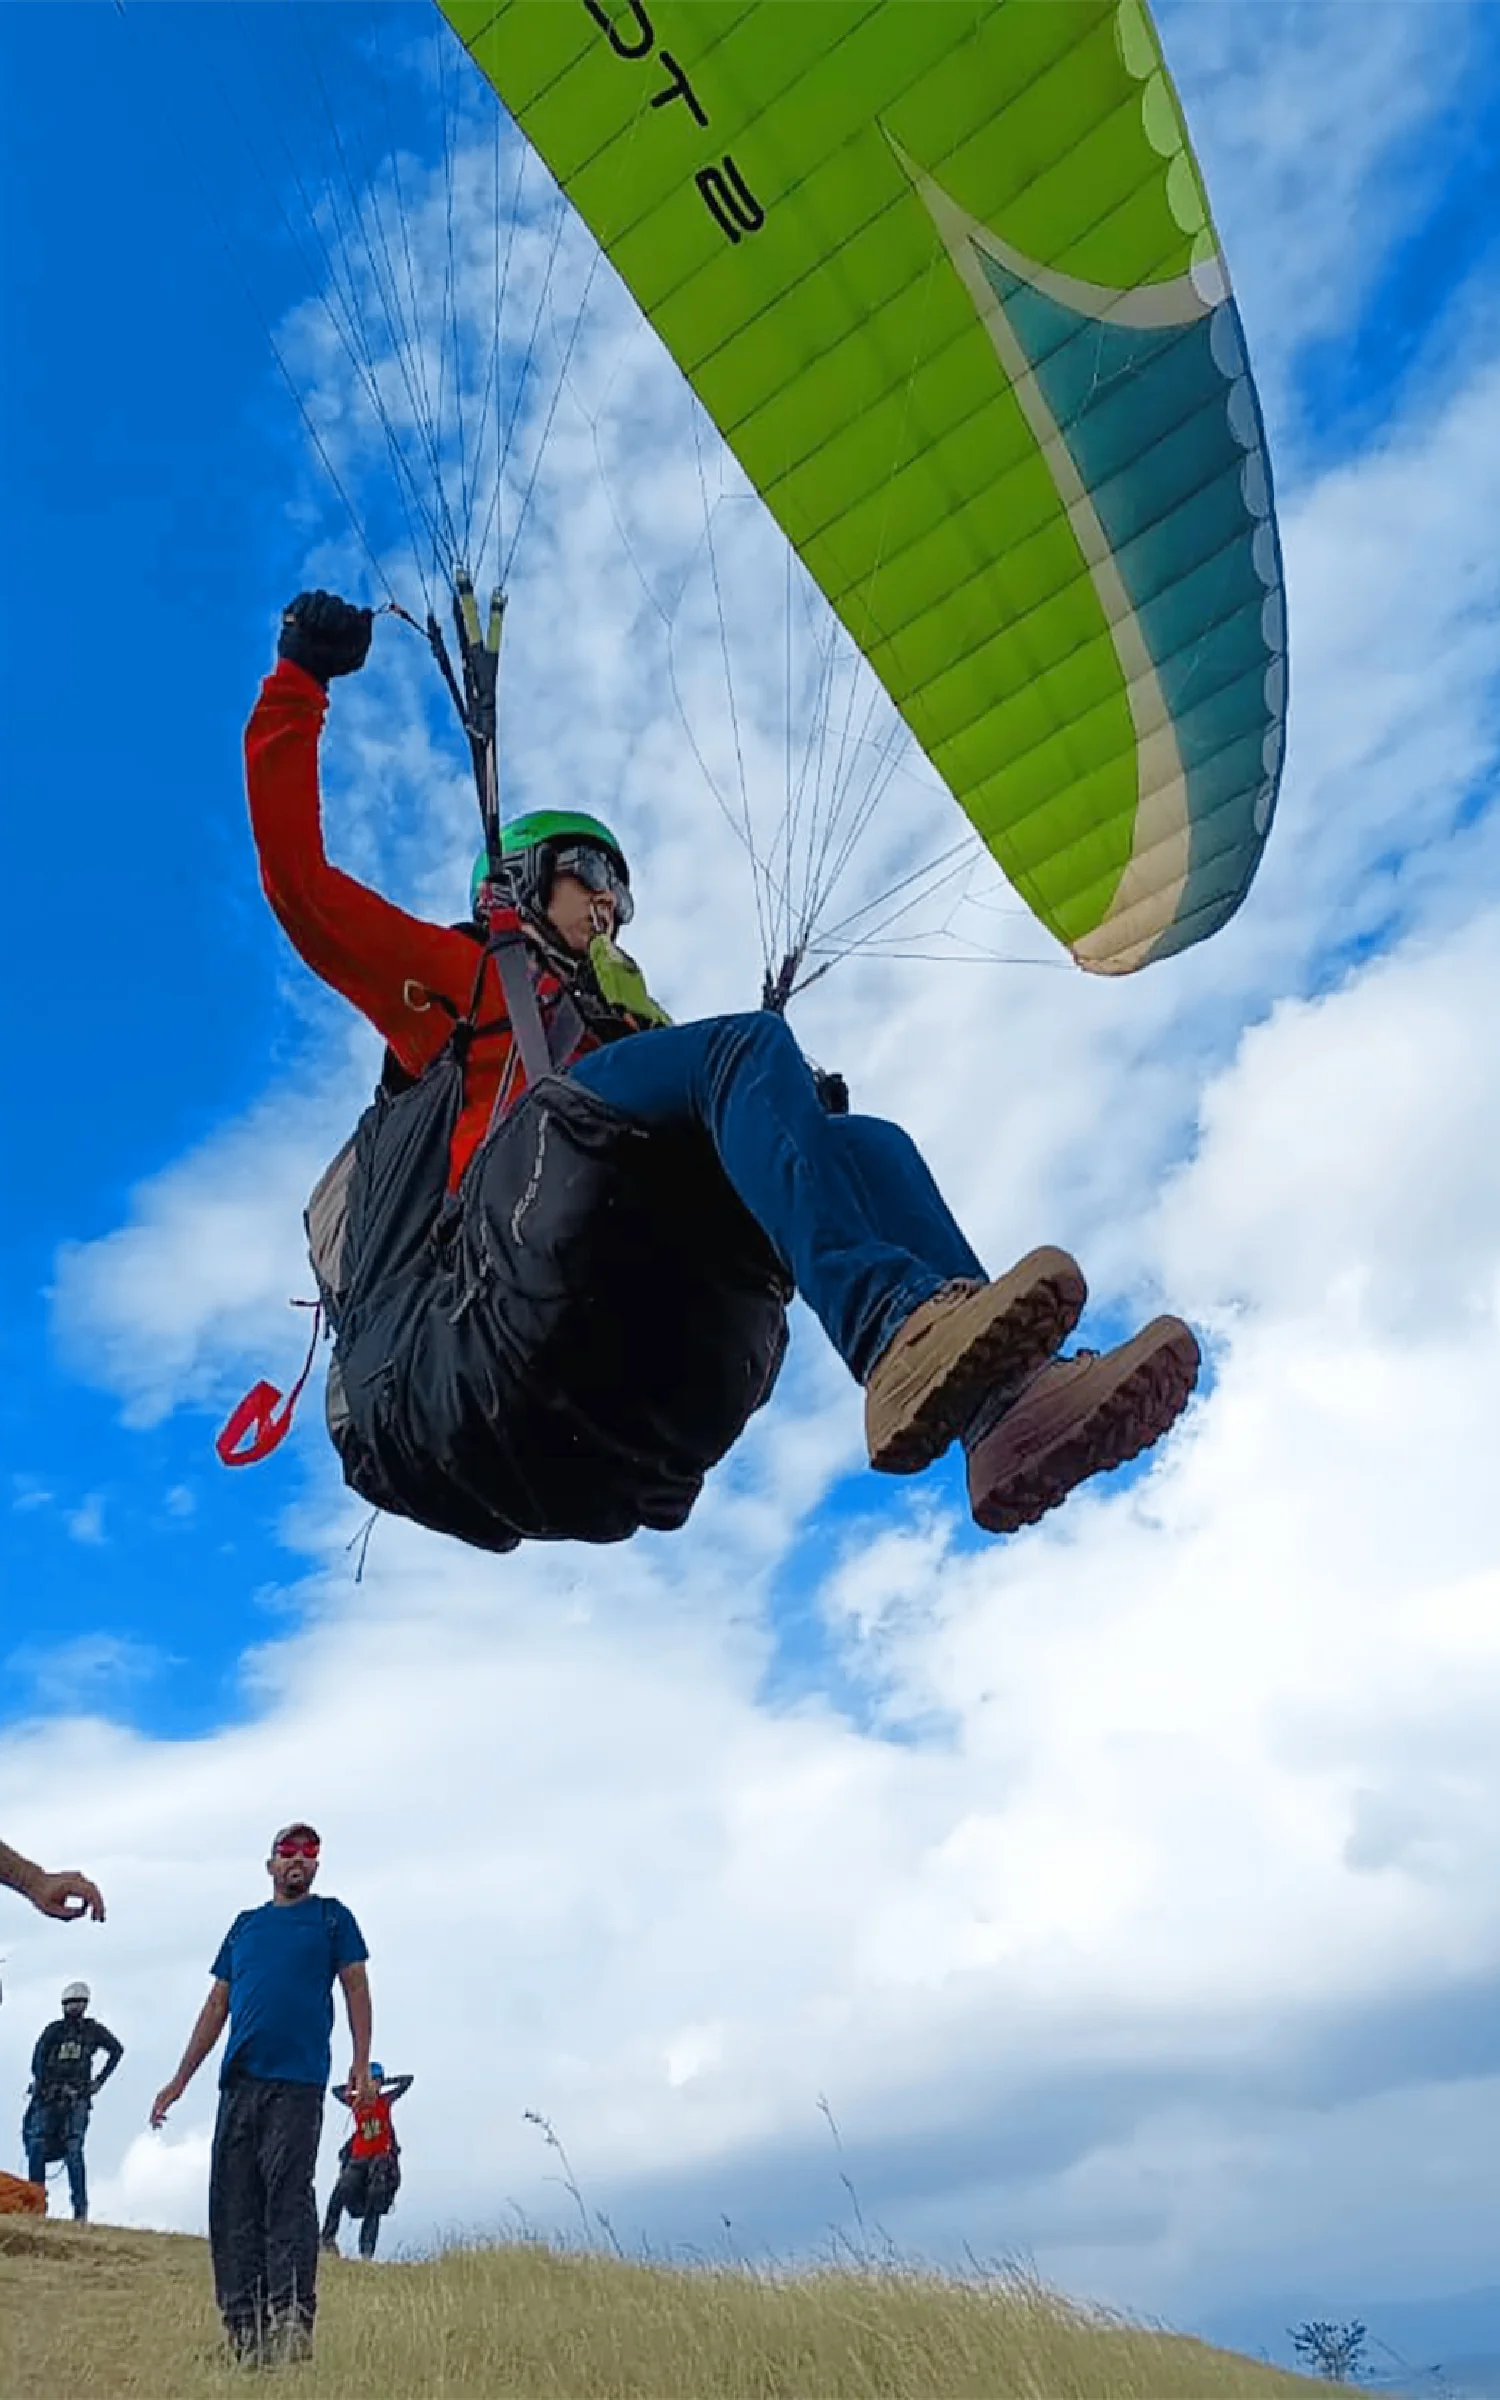 Does the amazing nature of paragliding ever wear off? - Quora